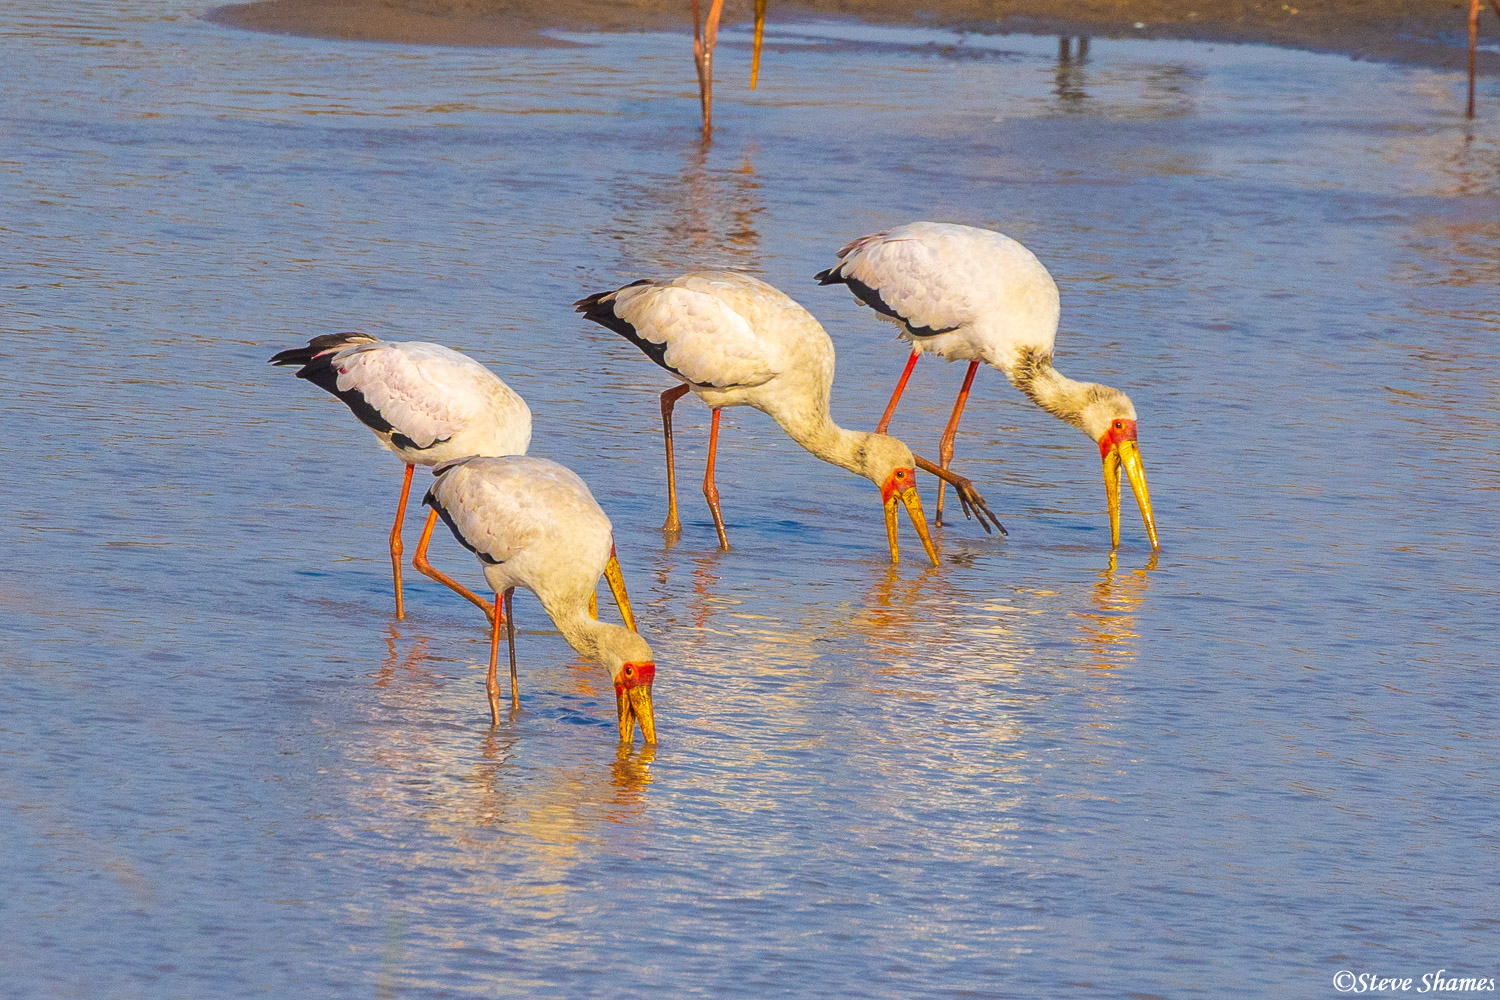 Yellow billed storks fishing in the Katuma River. There are lots of catfish here.